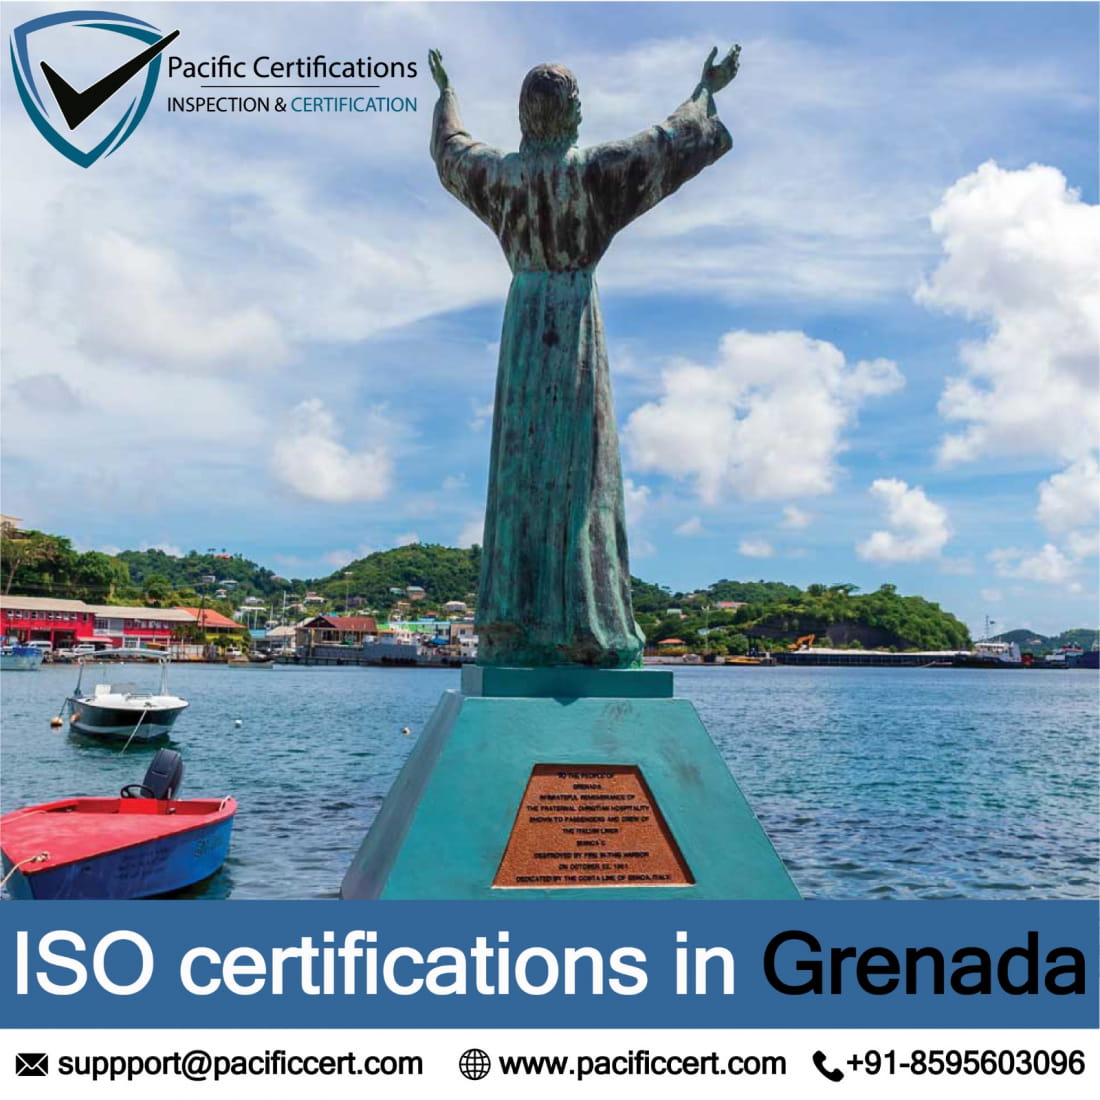 iso-certifications-in-grenada-and-how-pacific-certifications-can-help